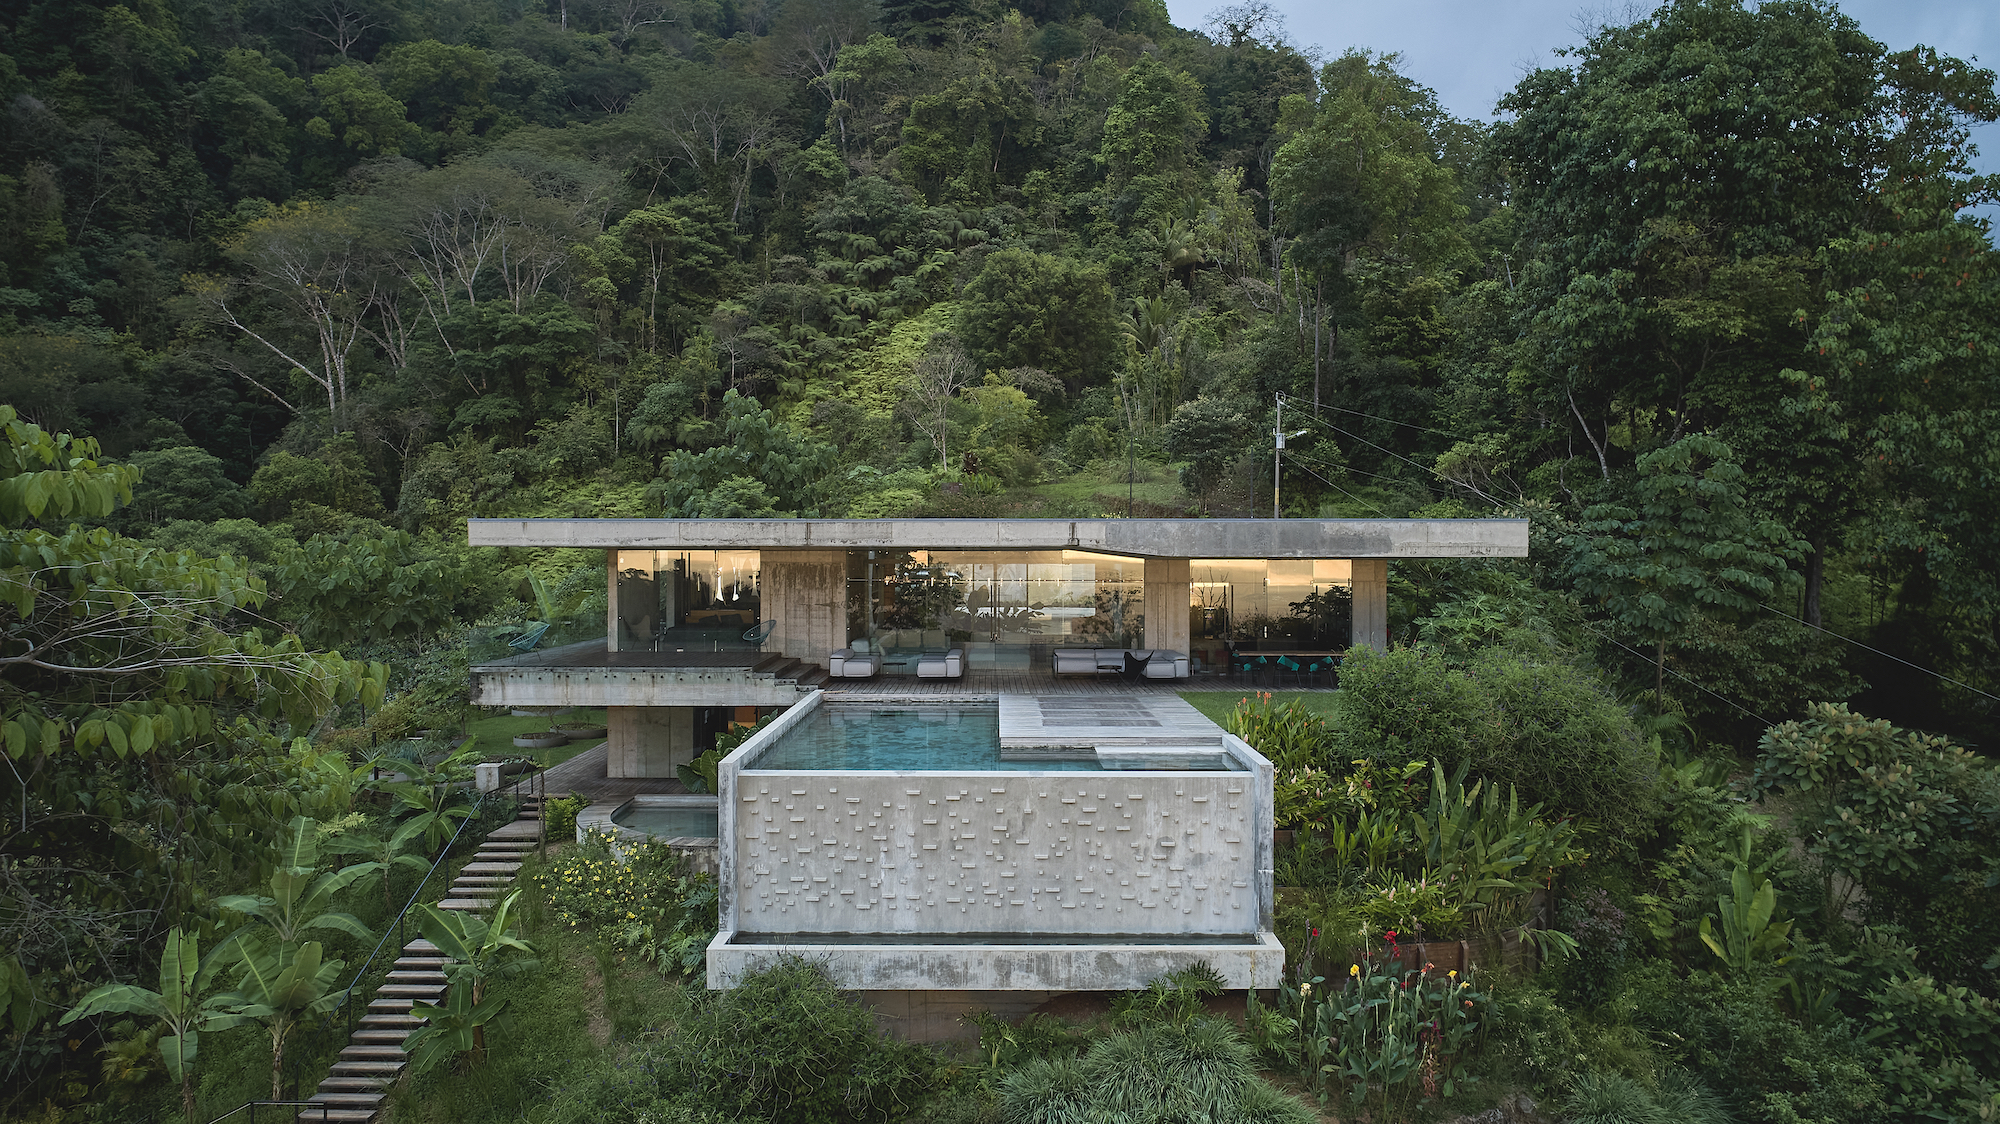 Art Villa in Costa Rica was designed by Prague-based architects Formafatal and Refuel Works